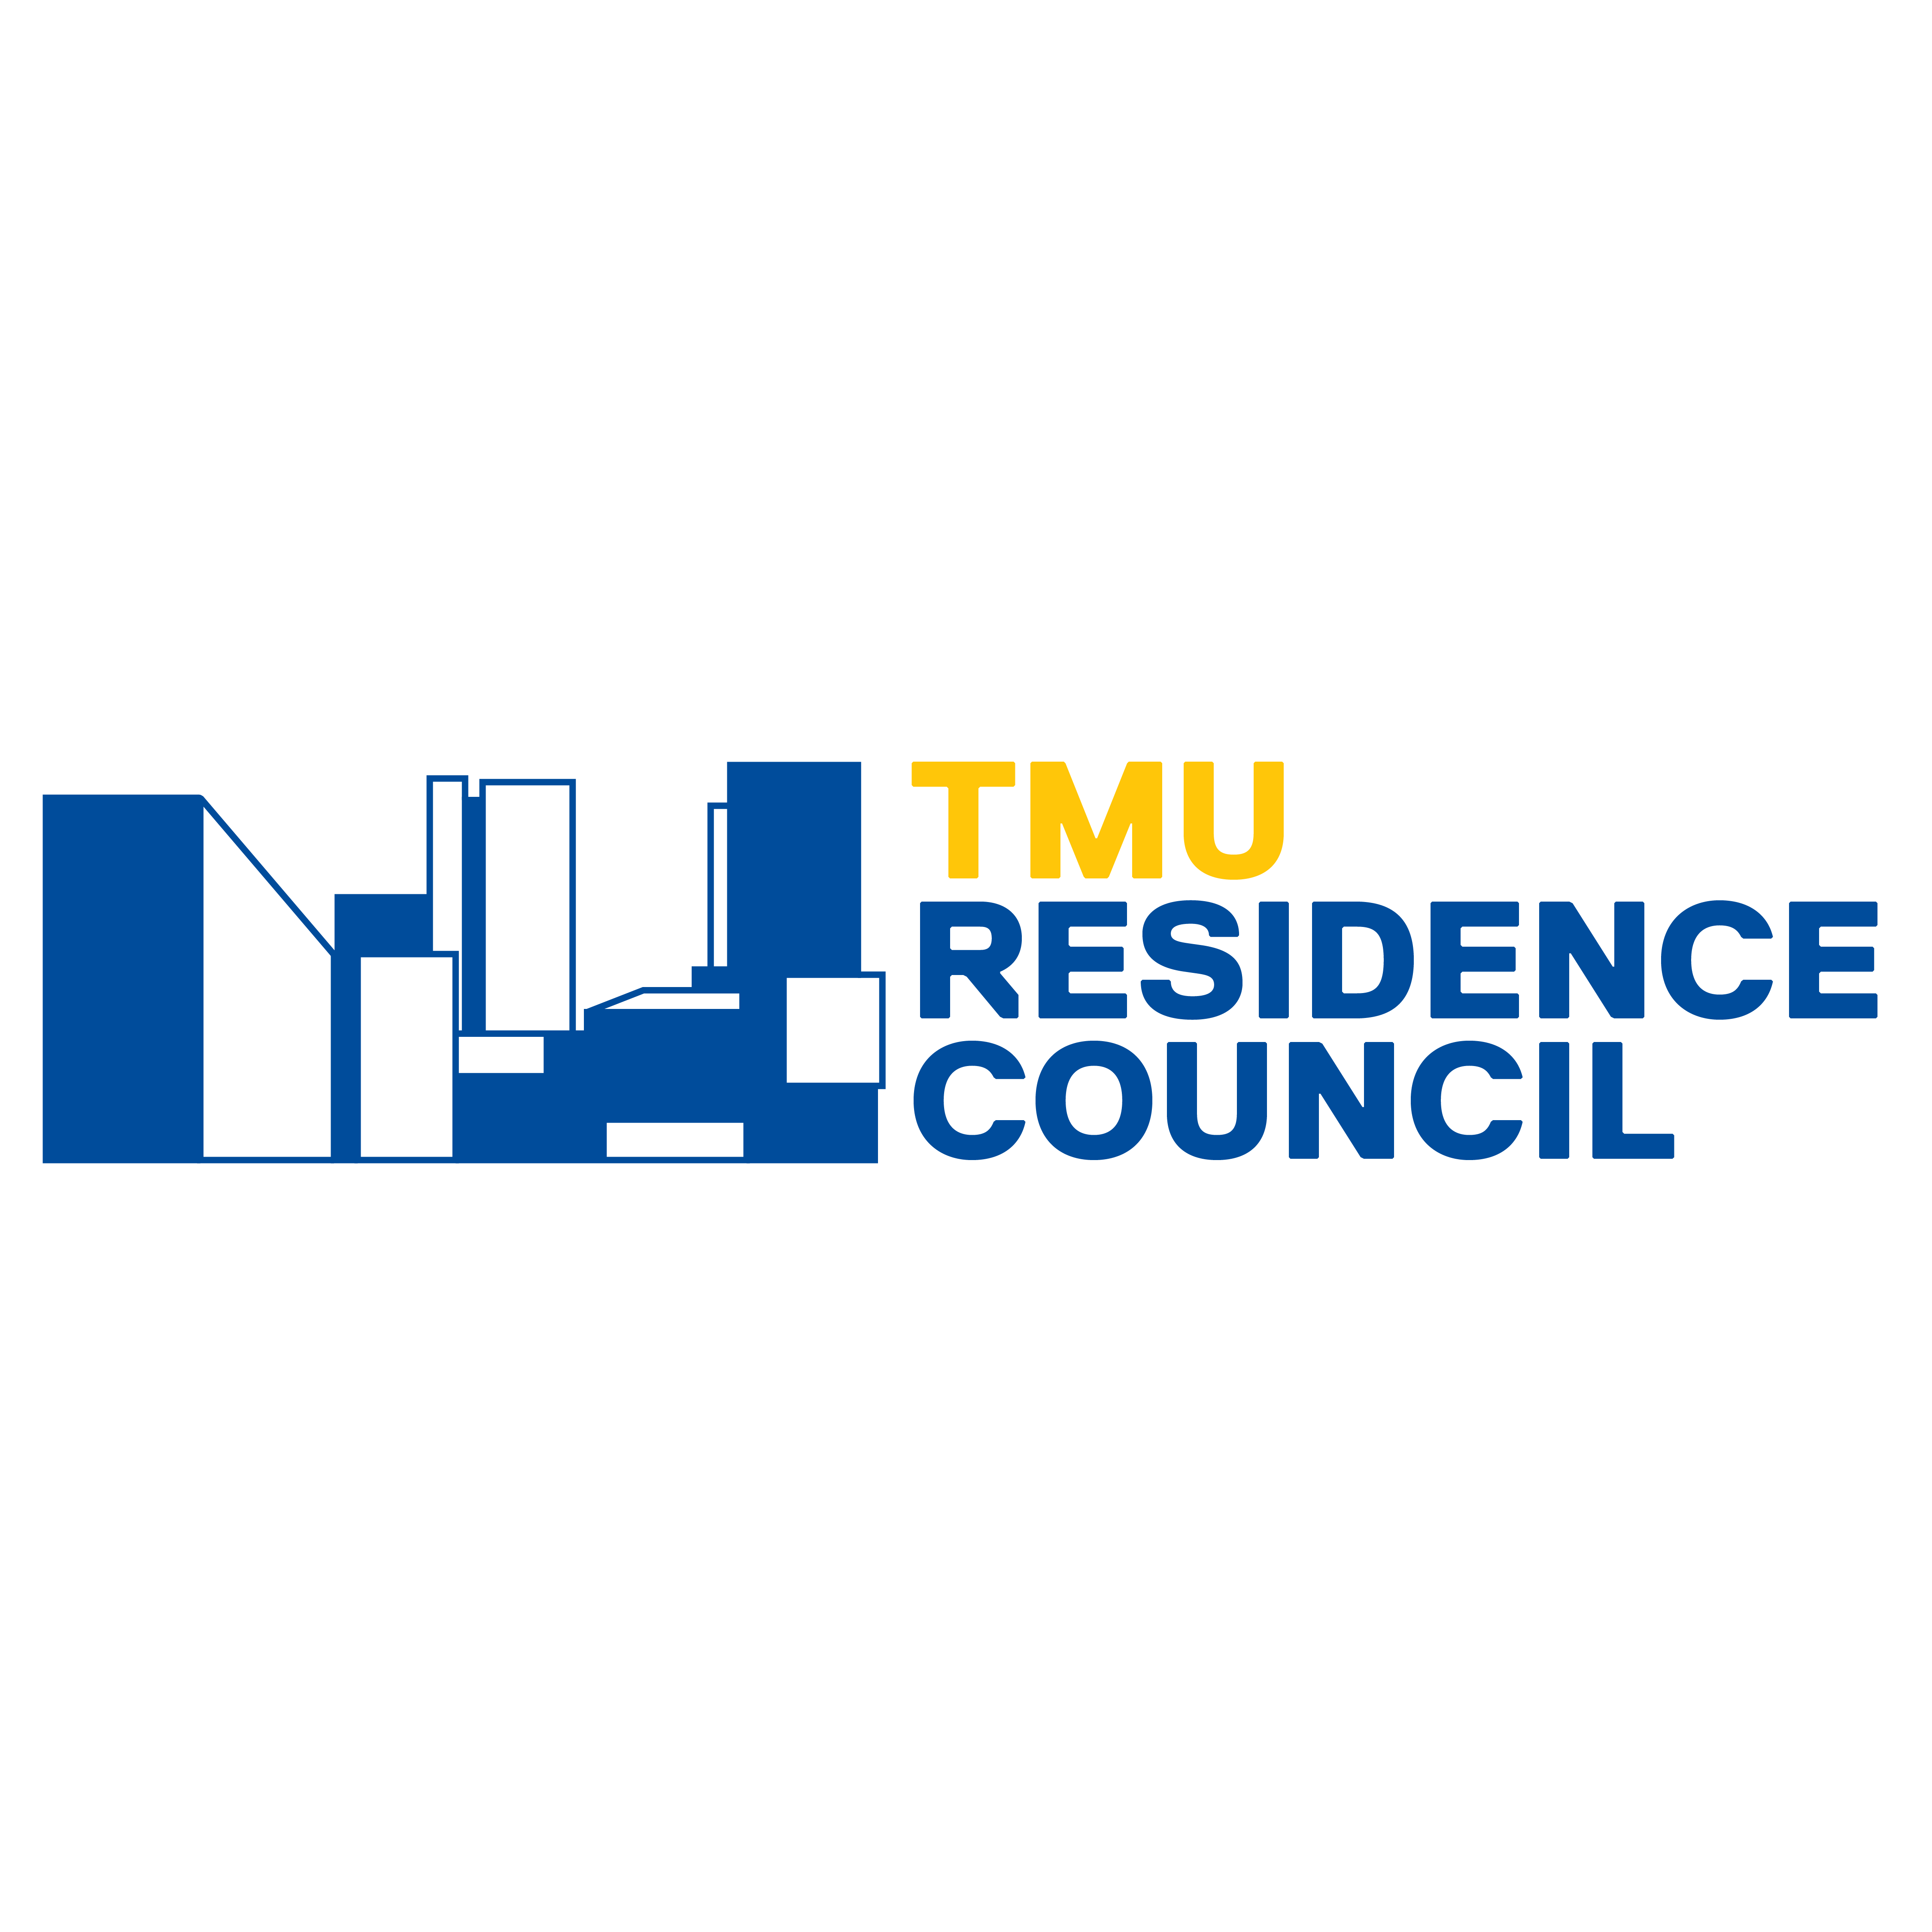 TMU Residence Council logo in blue and yellow writing with image of buildings